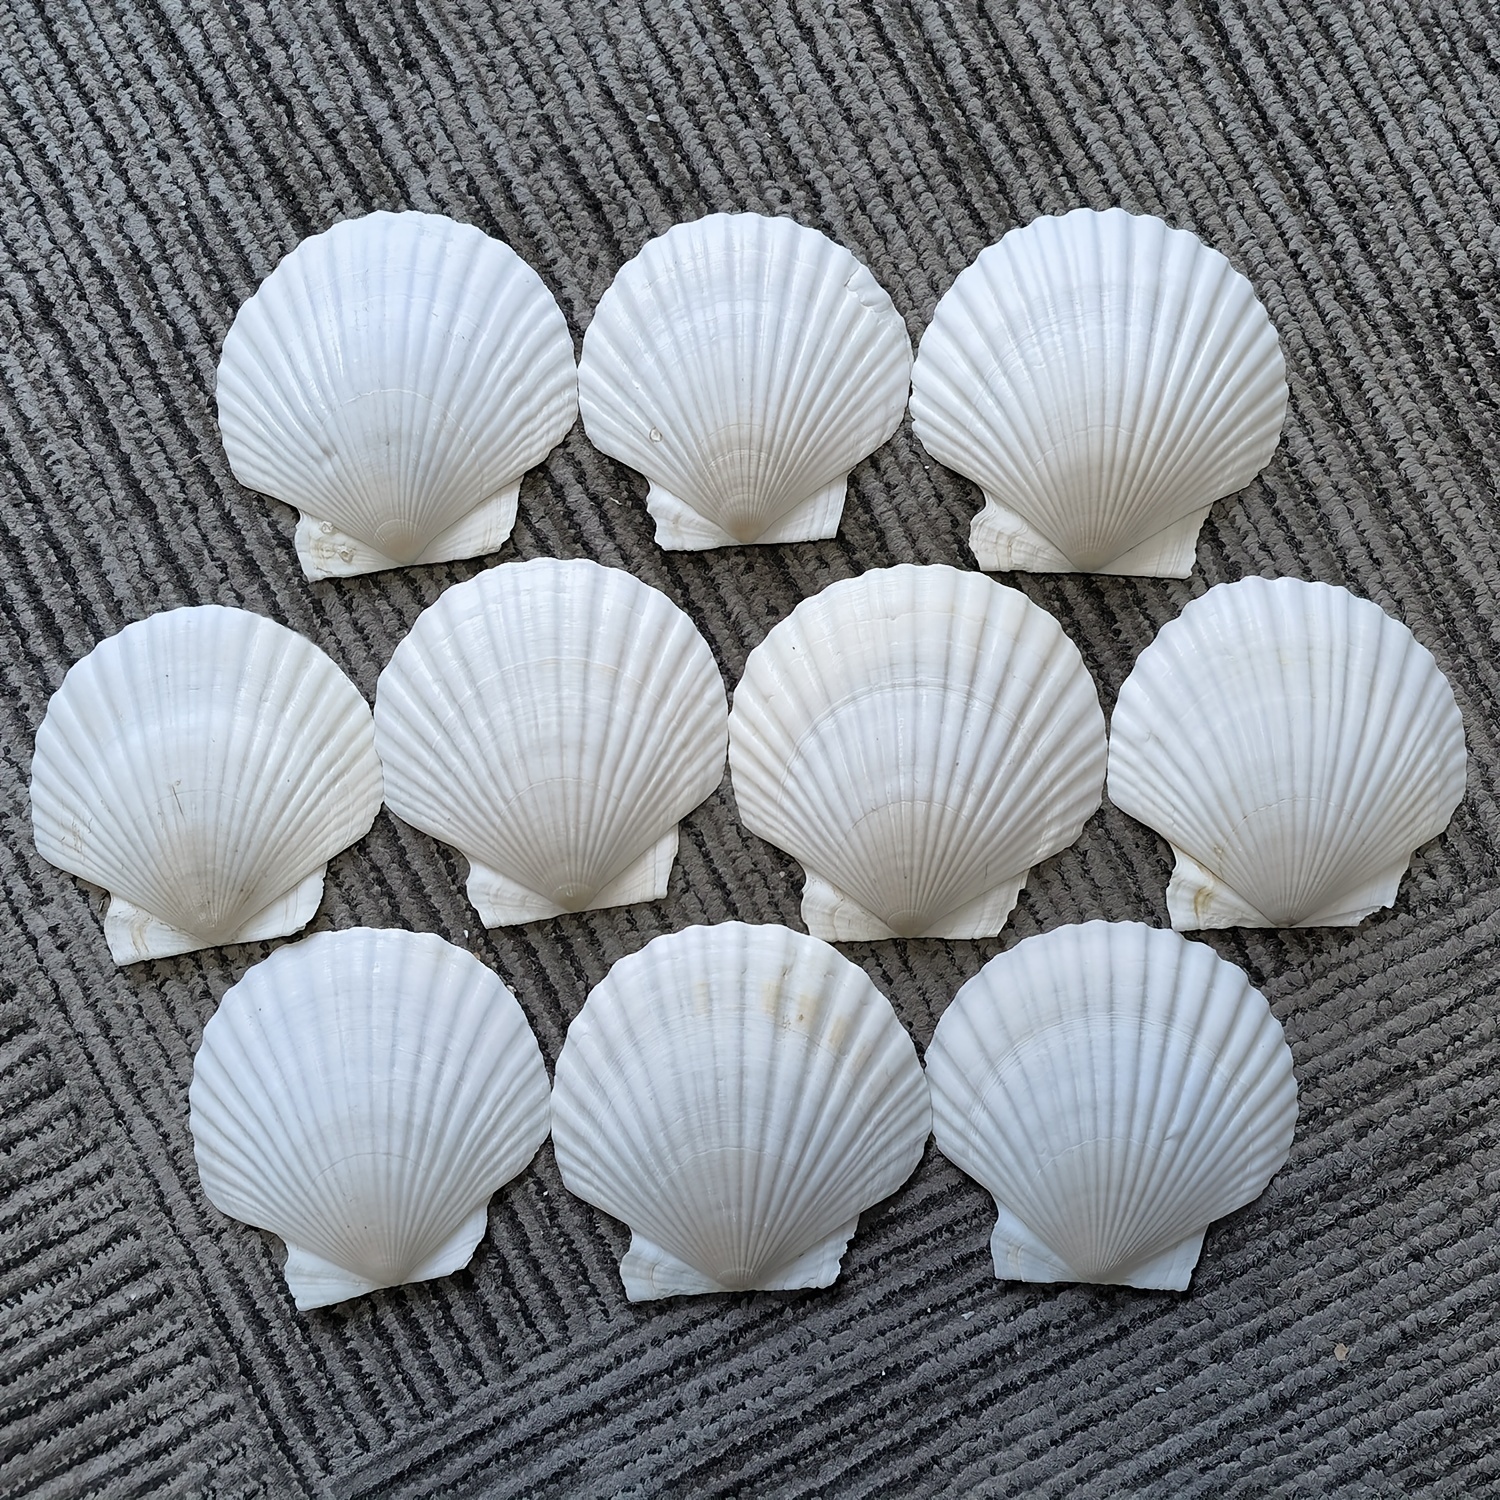 20pcs Natural Scallop Shells for DIY Crafts, Home Decor, and Vase Filler -  White Sea Shells from the Beach